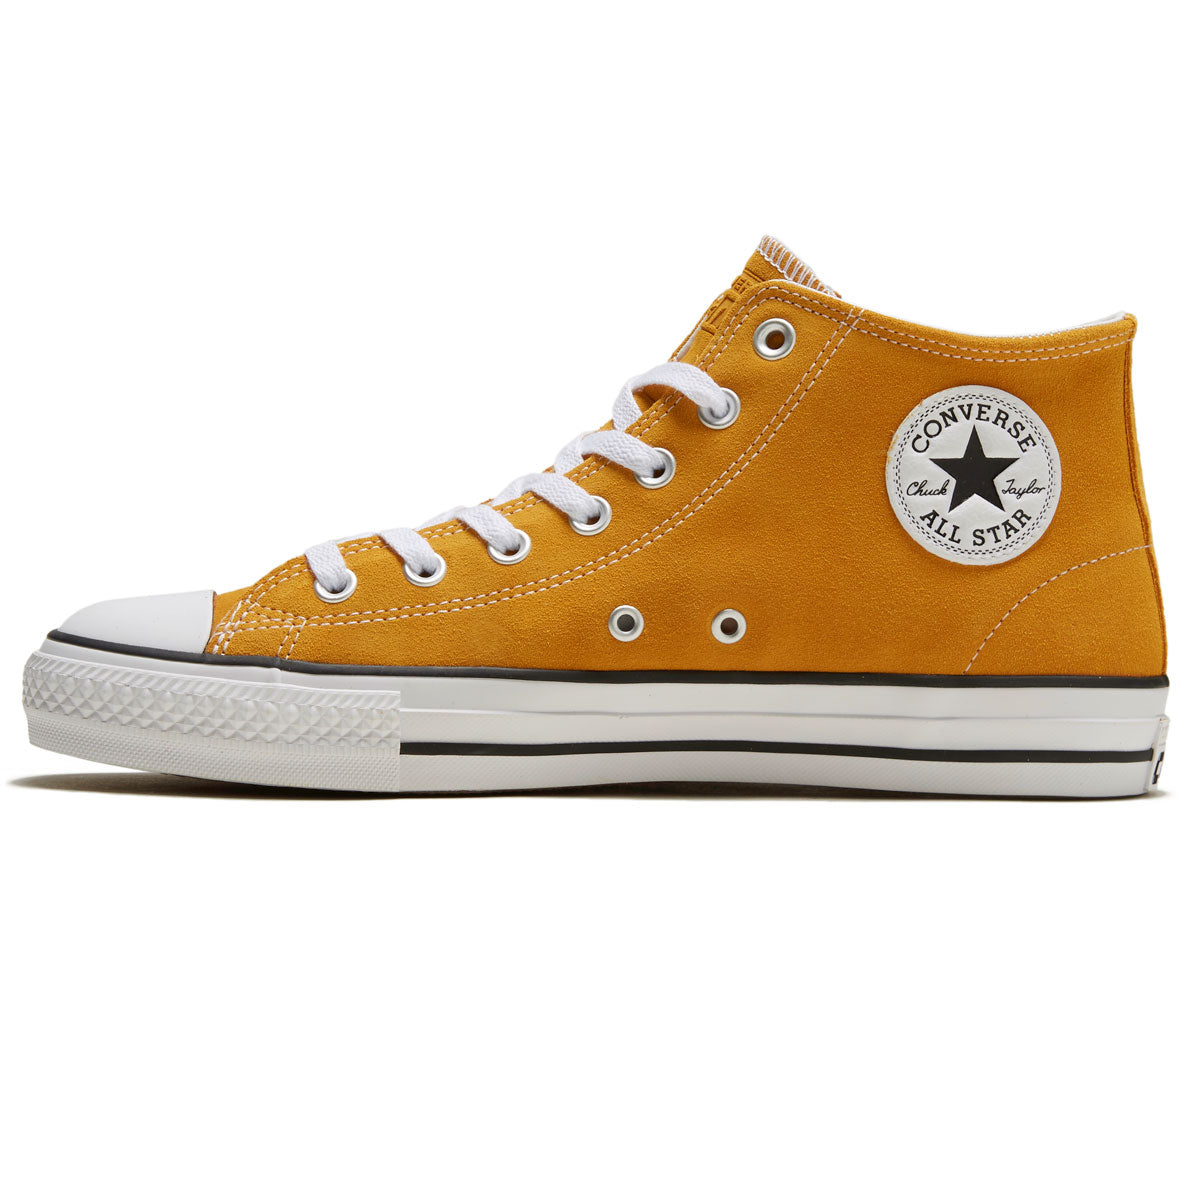 Converse Chuck Taylor All Star Pro Mid Shoes - Sunflower Gold/White/Bl – CCS